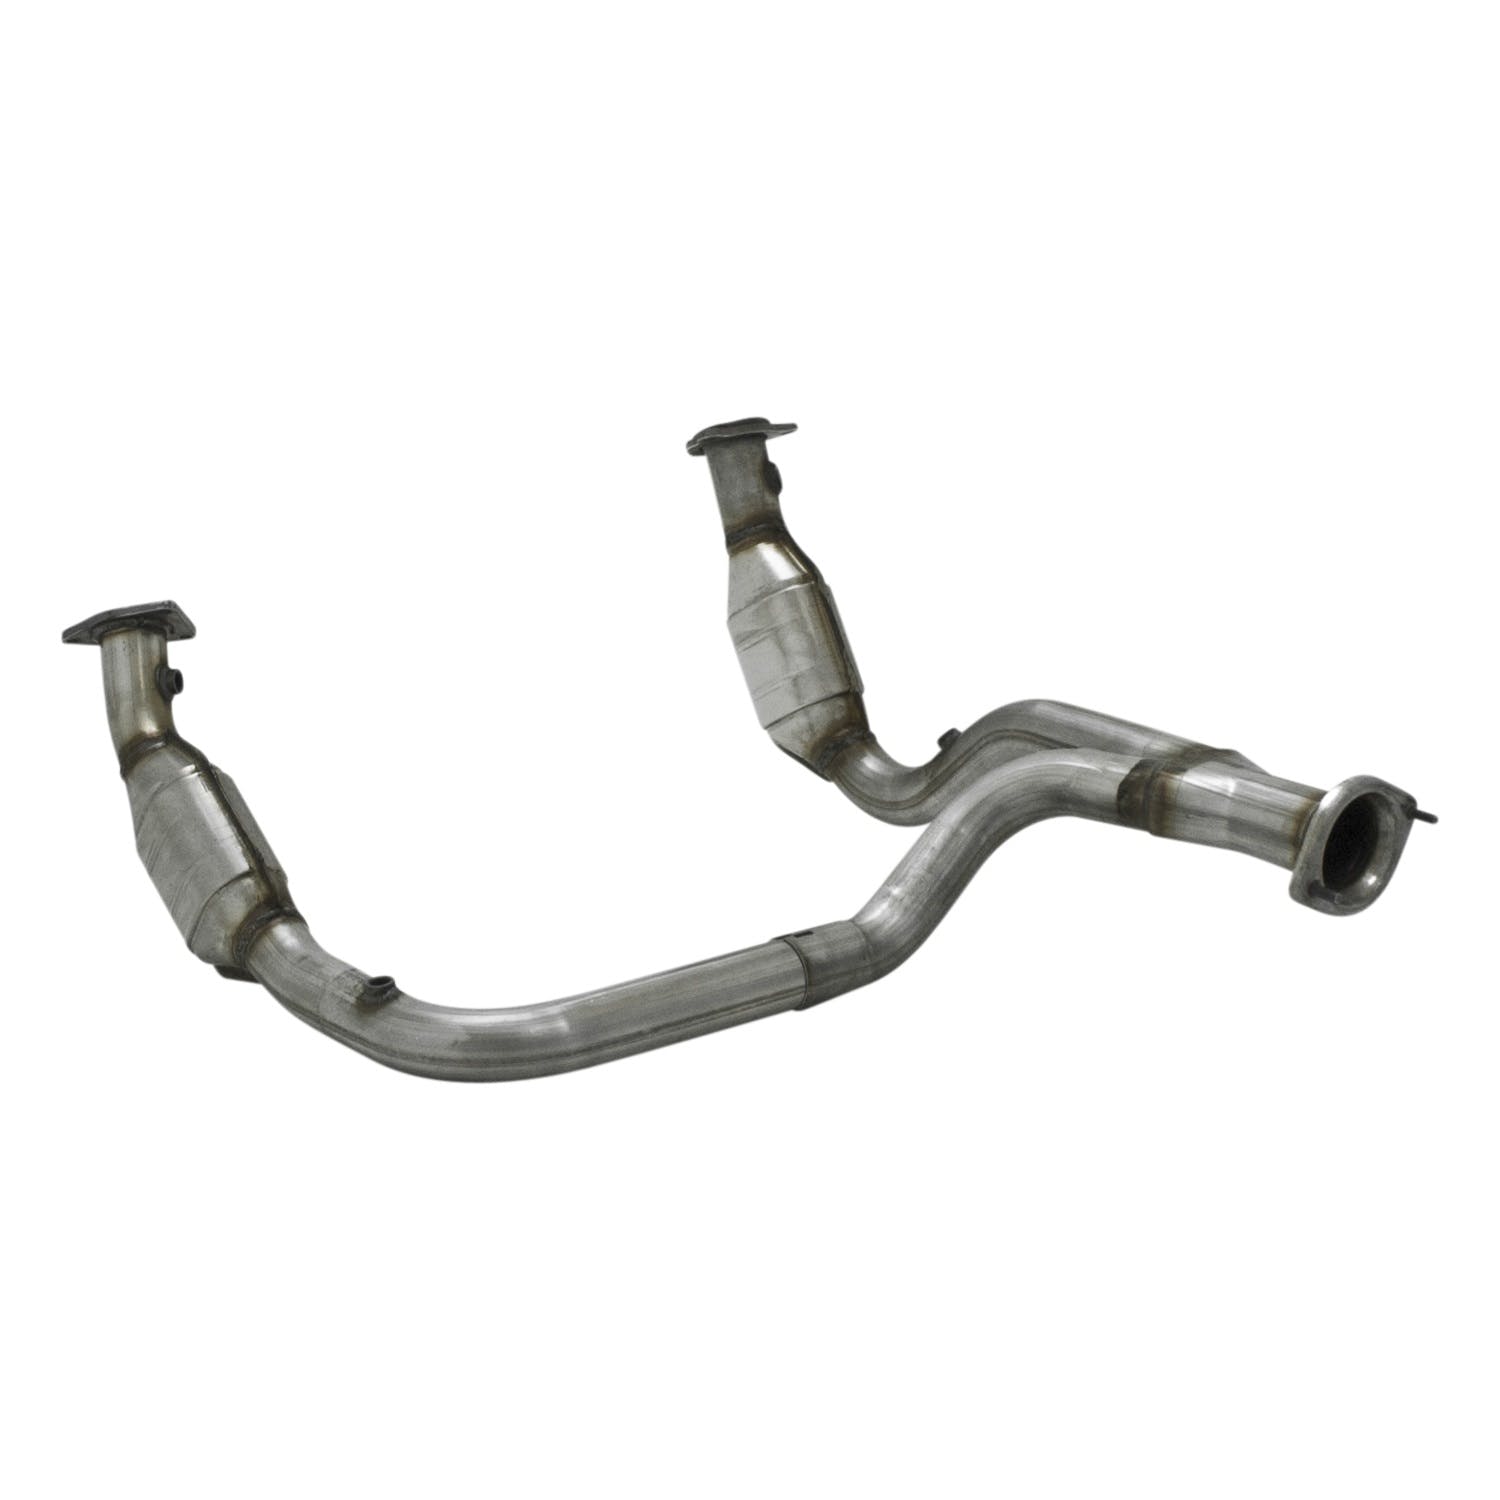 Flowmaster Catalytic Converters 2010020 Catalytic Converter-Direct Fit-2.50 Inlet 3.00 in. Outlet-49 State